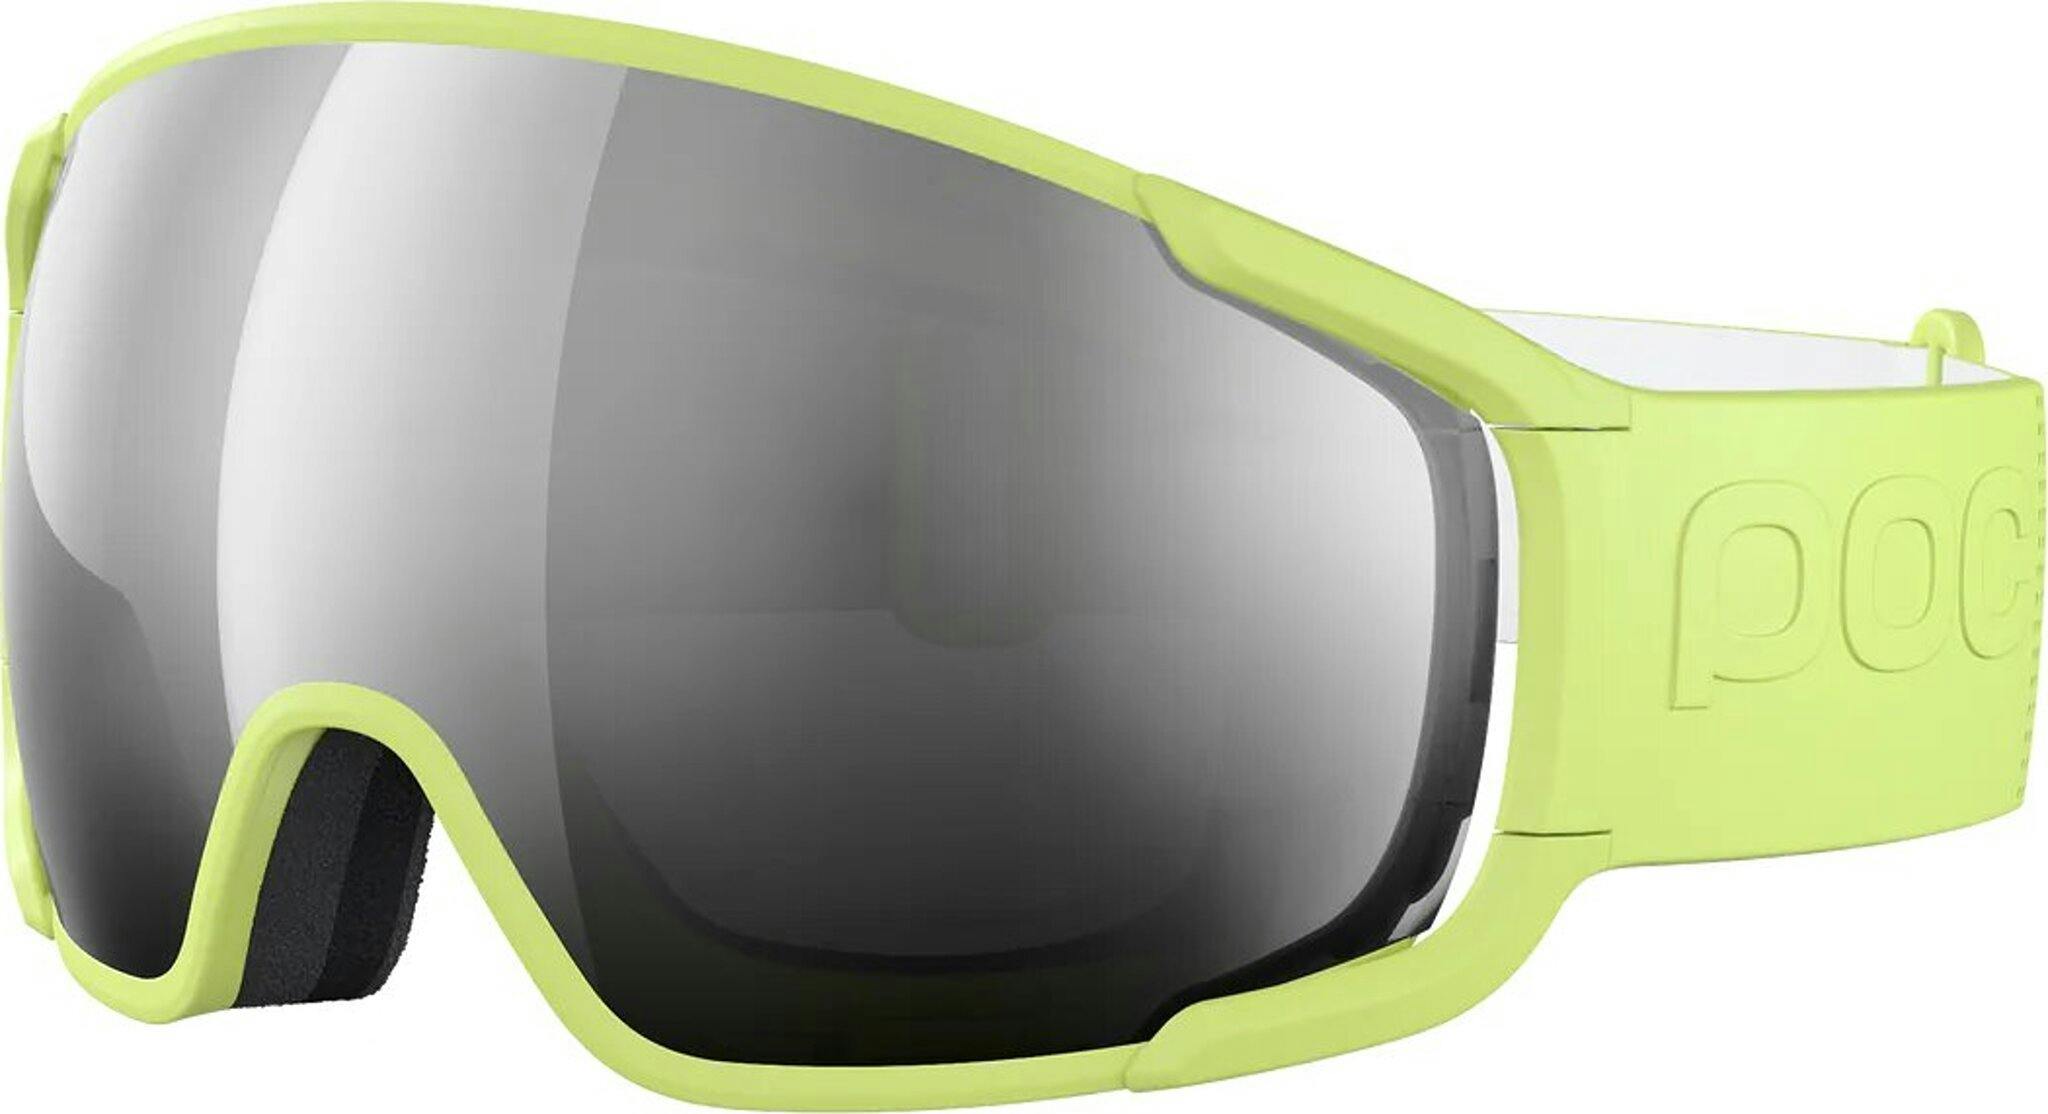 Product image for Zonula Clarity Goggles - Unisex